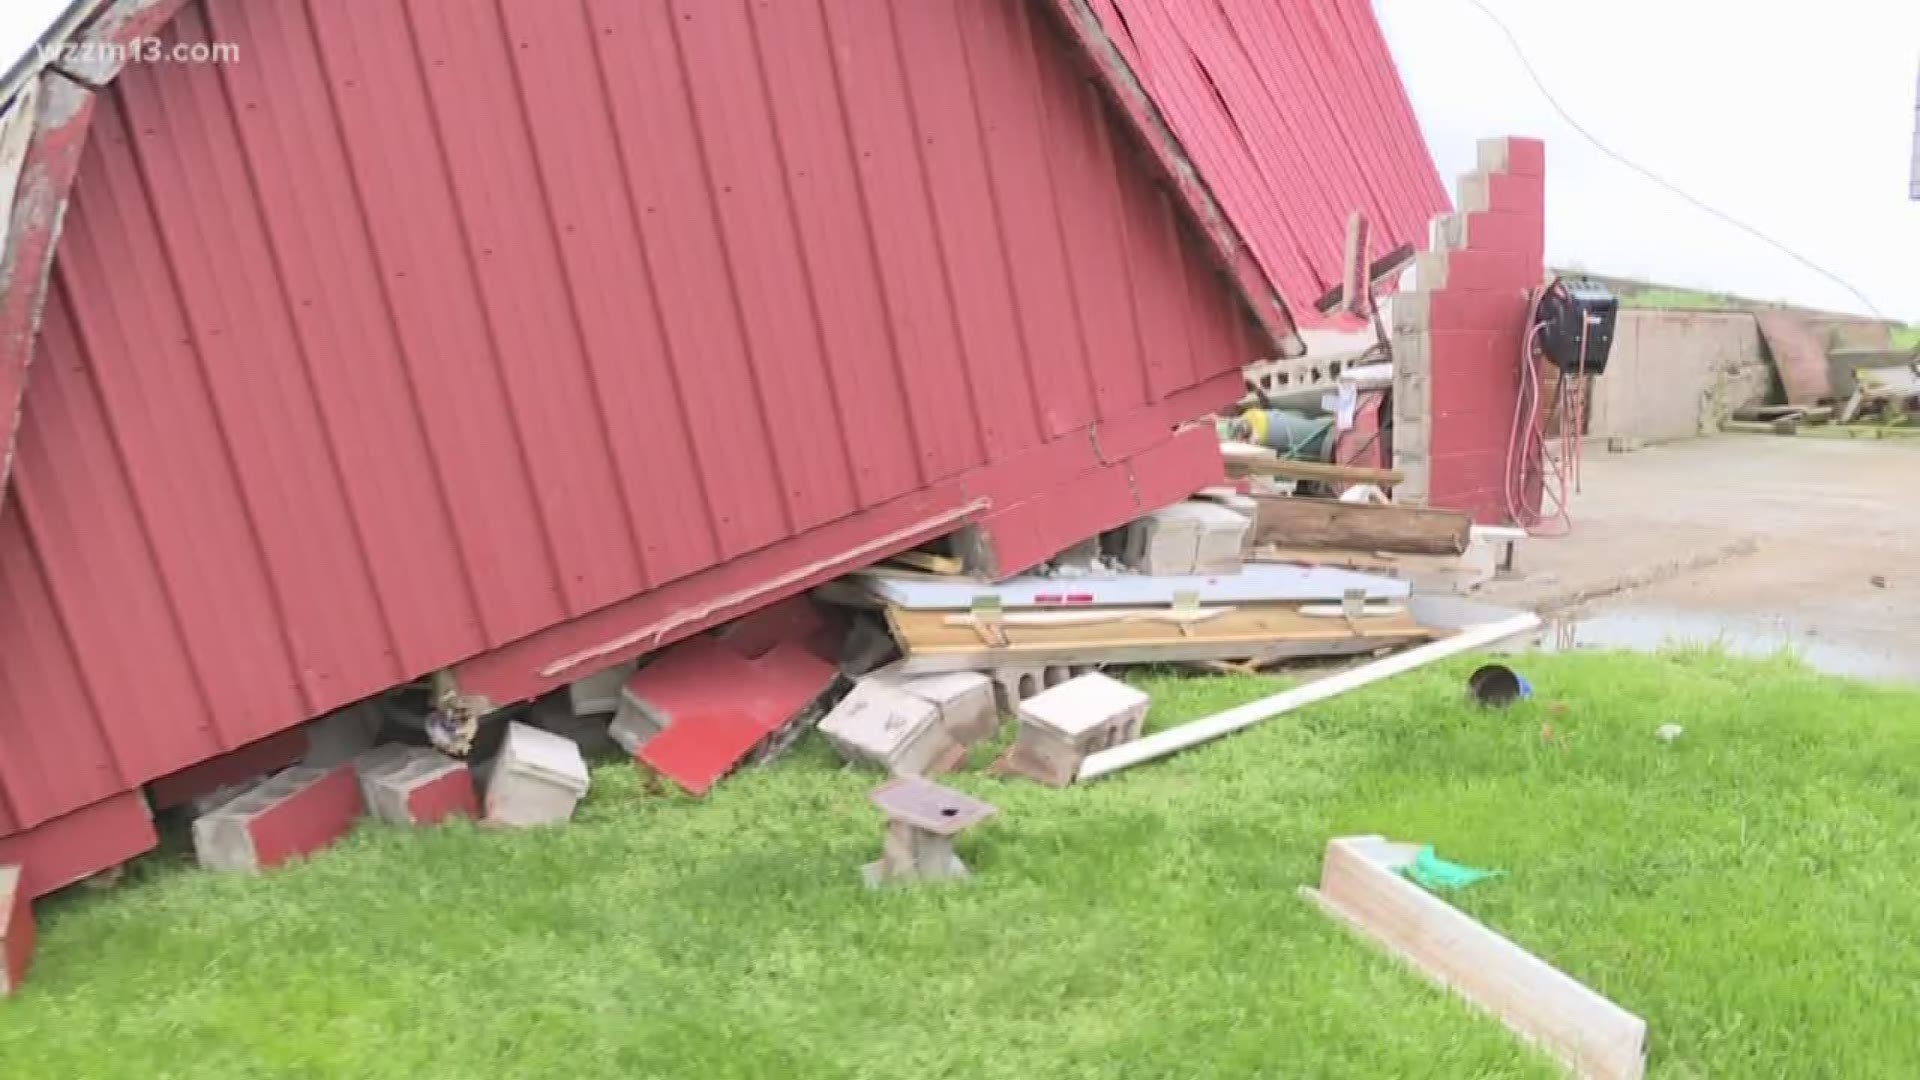 Area farmer's barn suffered severe damage after an EF-0 tornado touched down Sunday. The NWS confirmed the tornado after the warning lasted just a brief nine minutes.